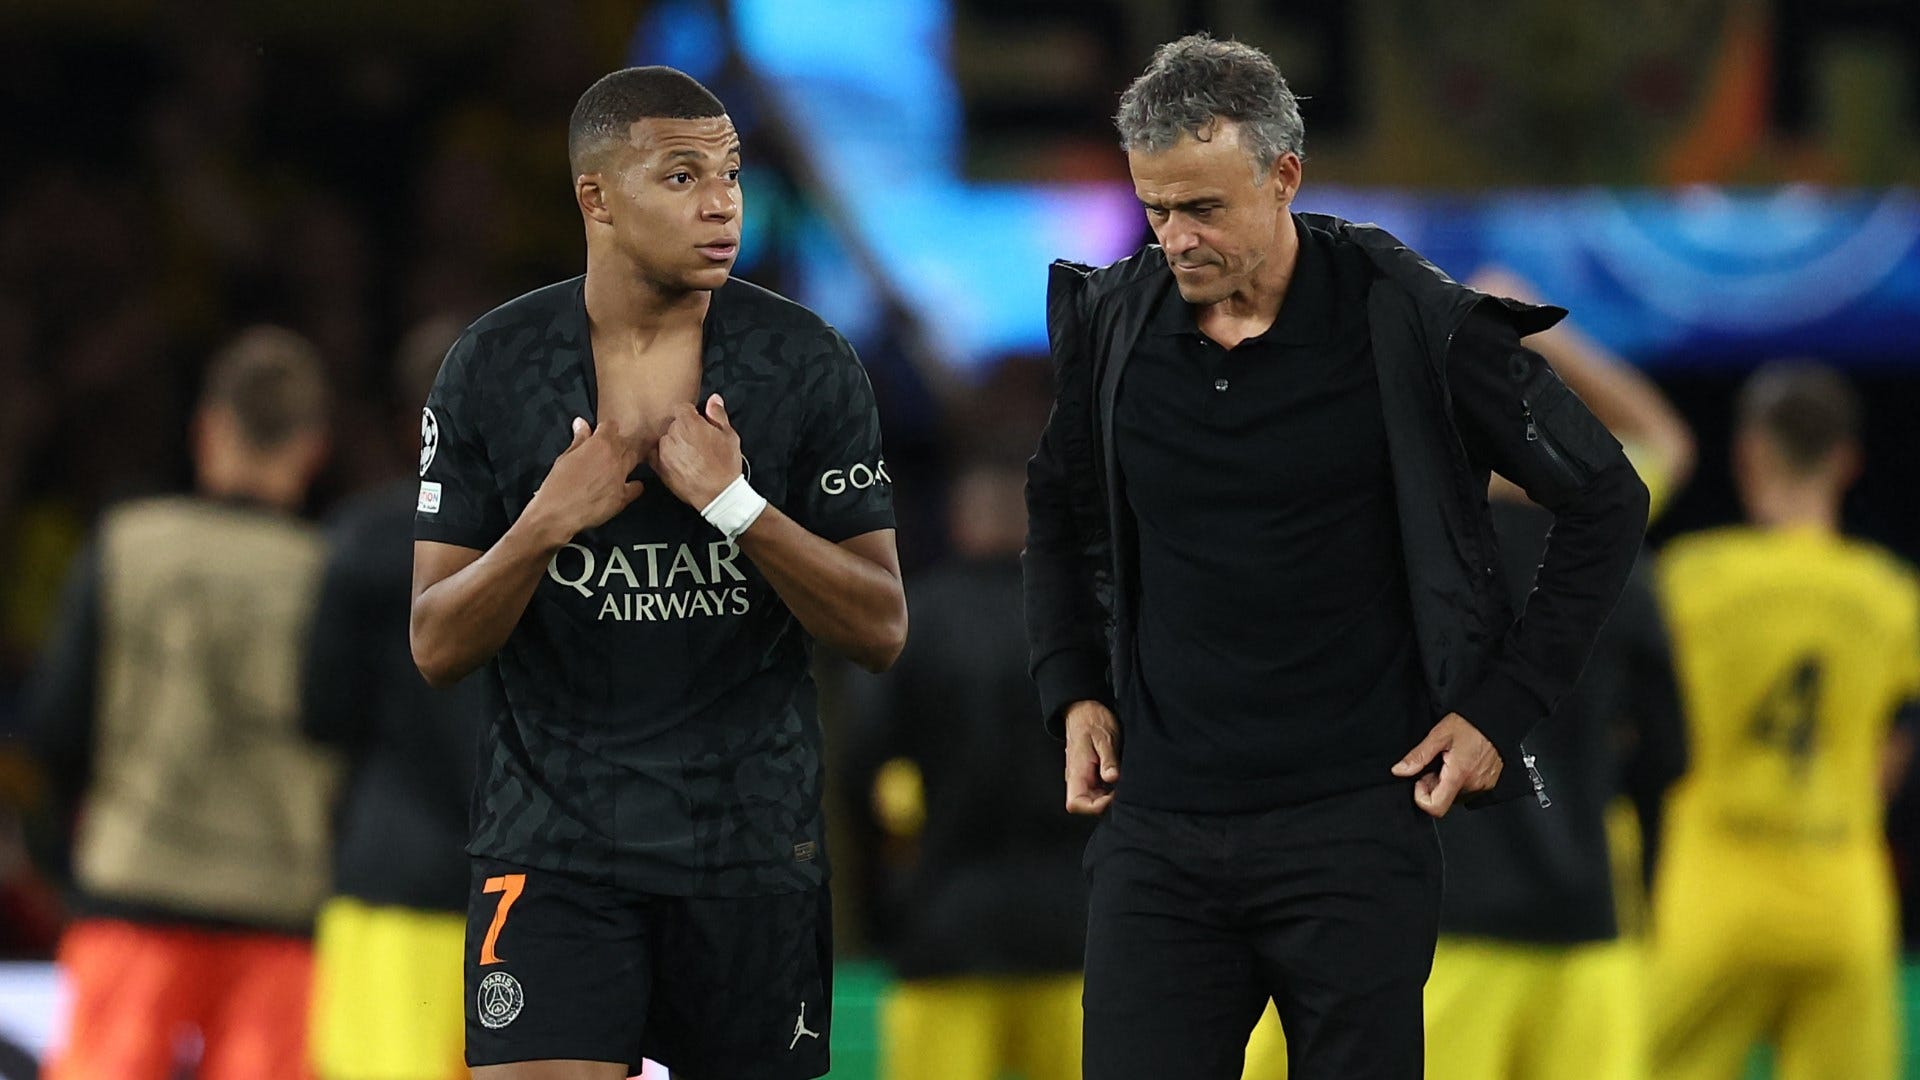 Shots fired at Kylian Mbappe? Luis Enrique ‘convinced’ PSG will have ‘way better squad’ next season as star forward nears Real Madrid transfer